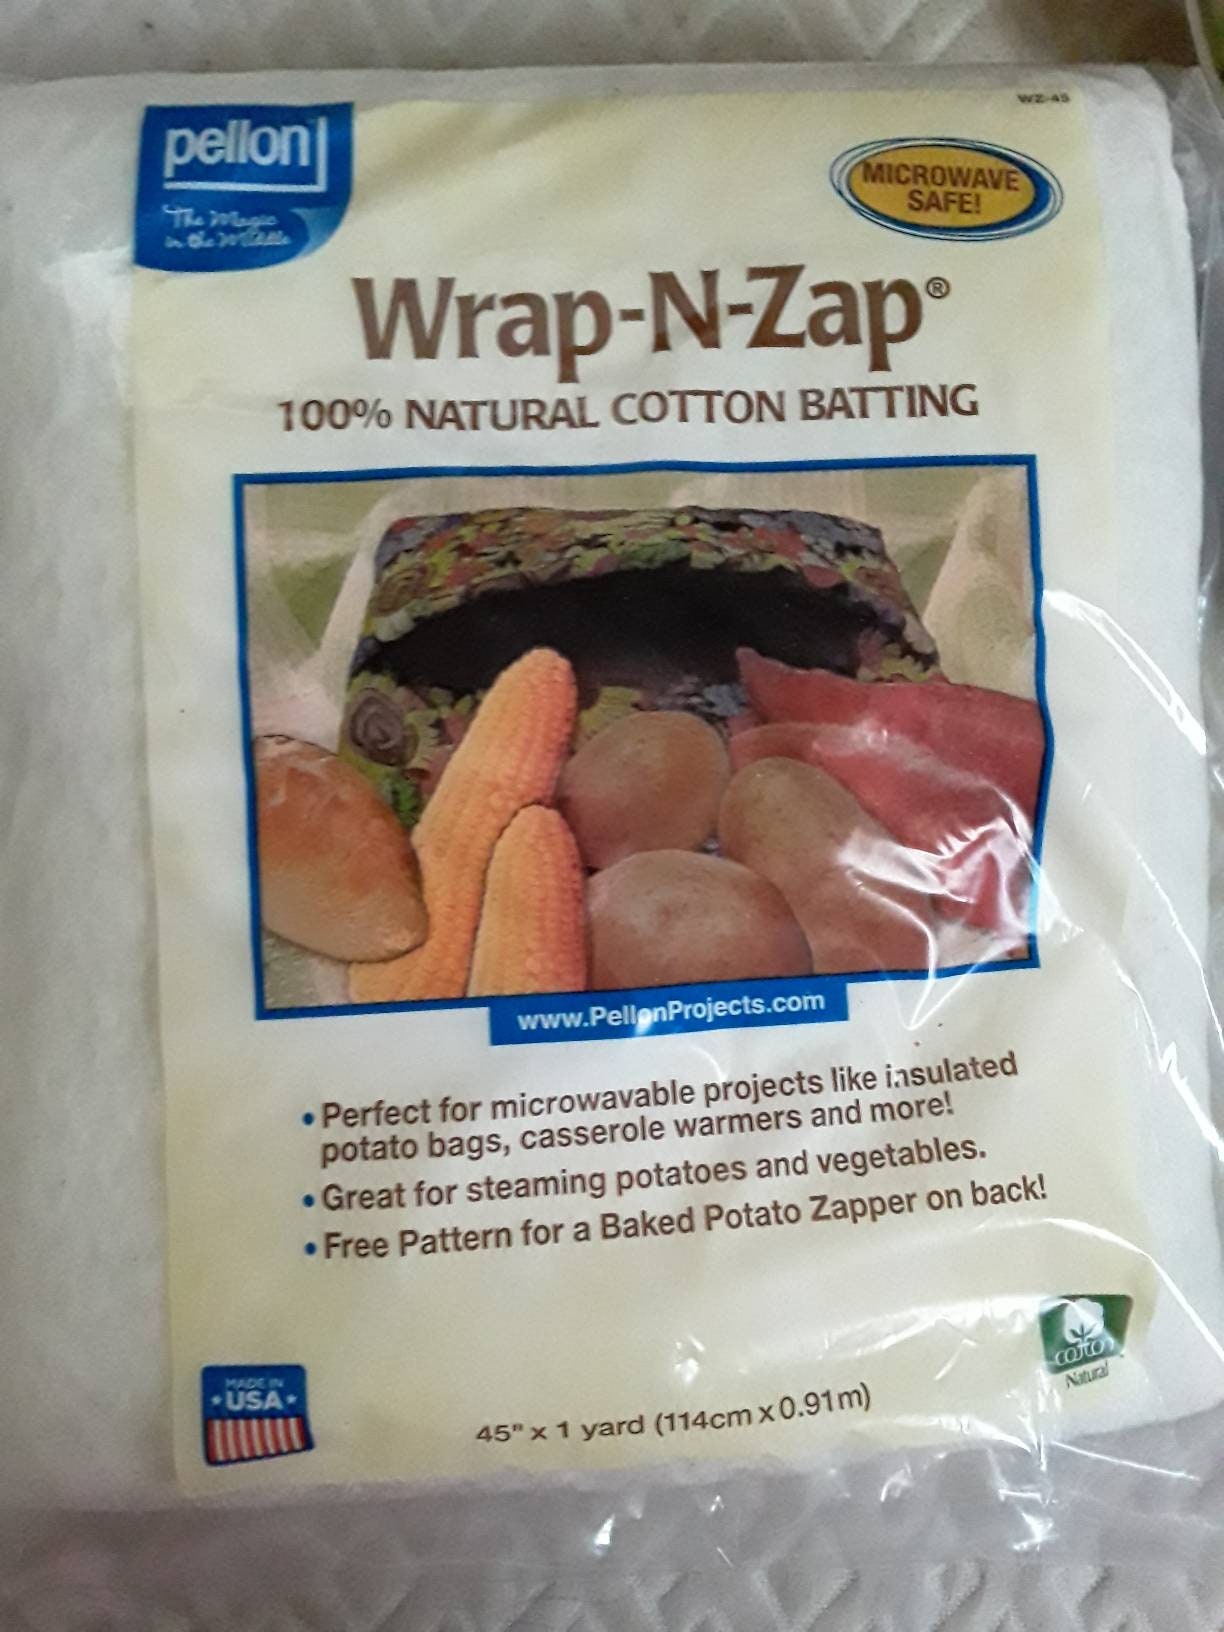 Natural Cotton Wrap-n-zap Batting in a Package, Pellon 